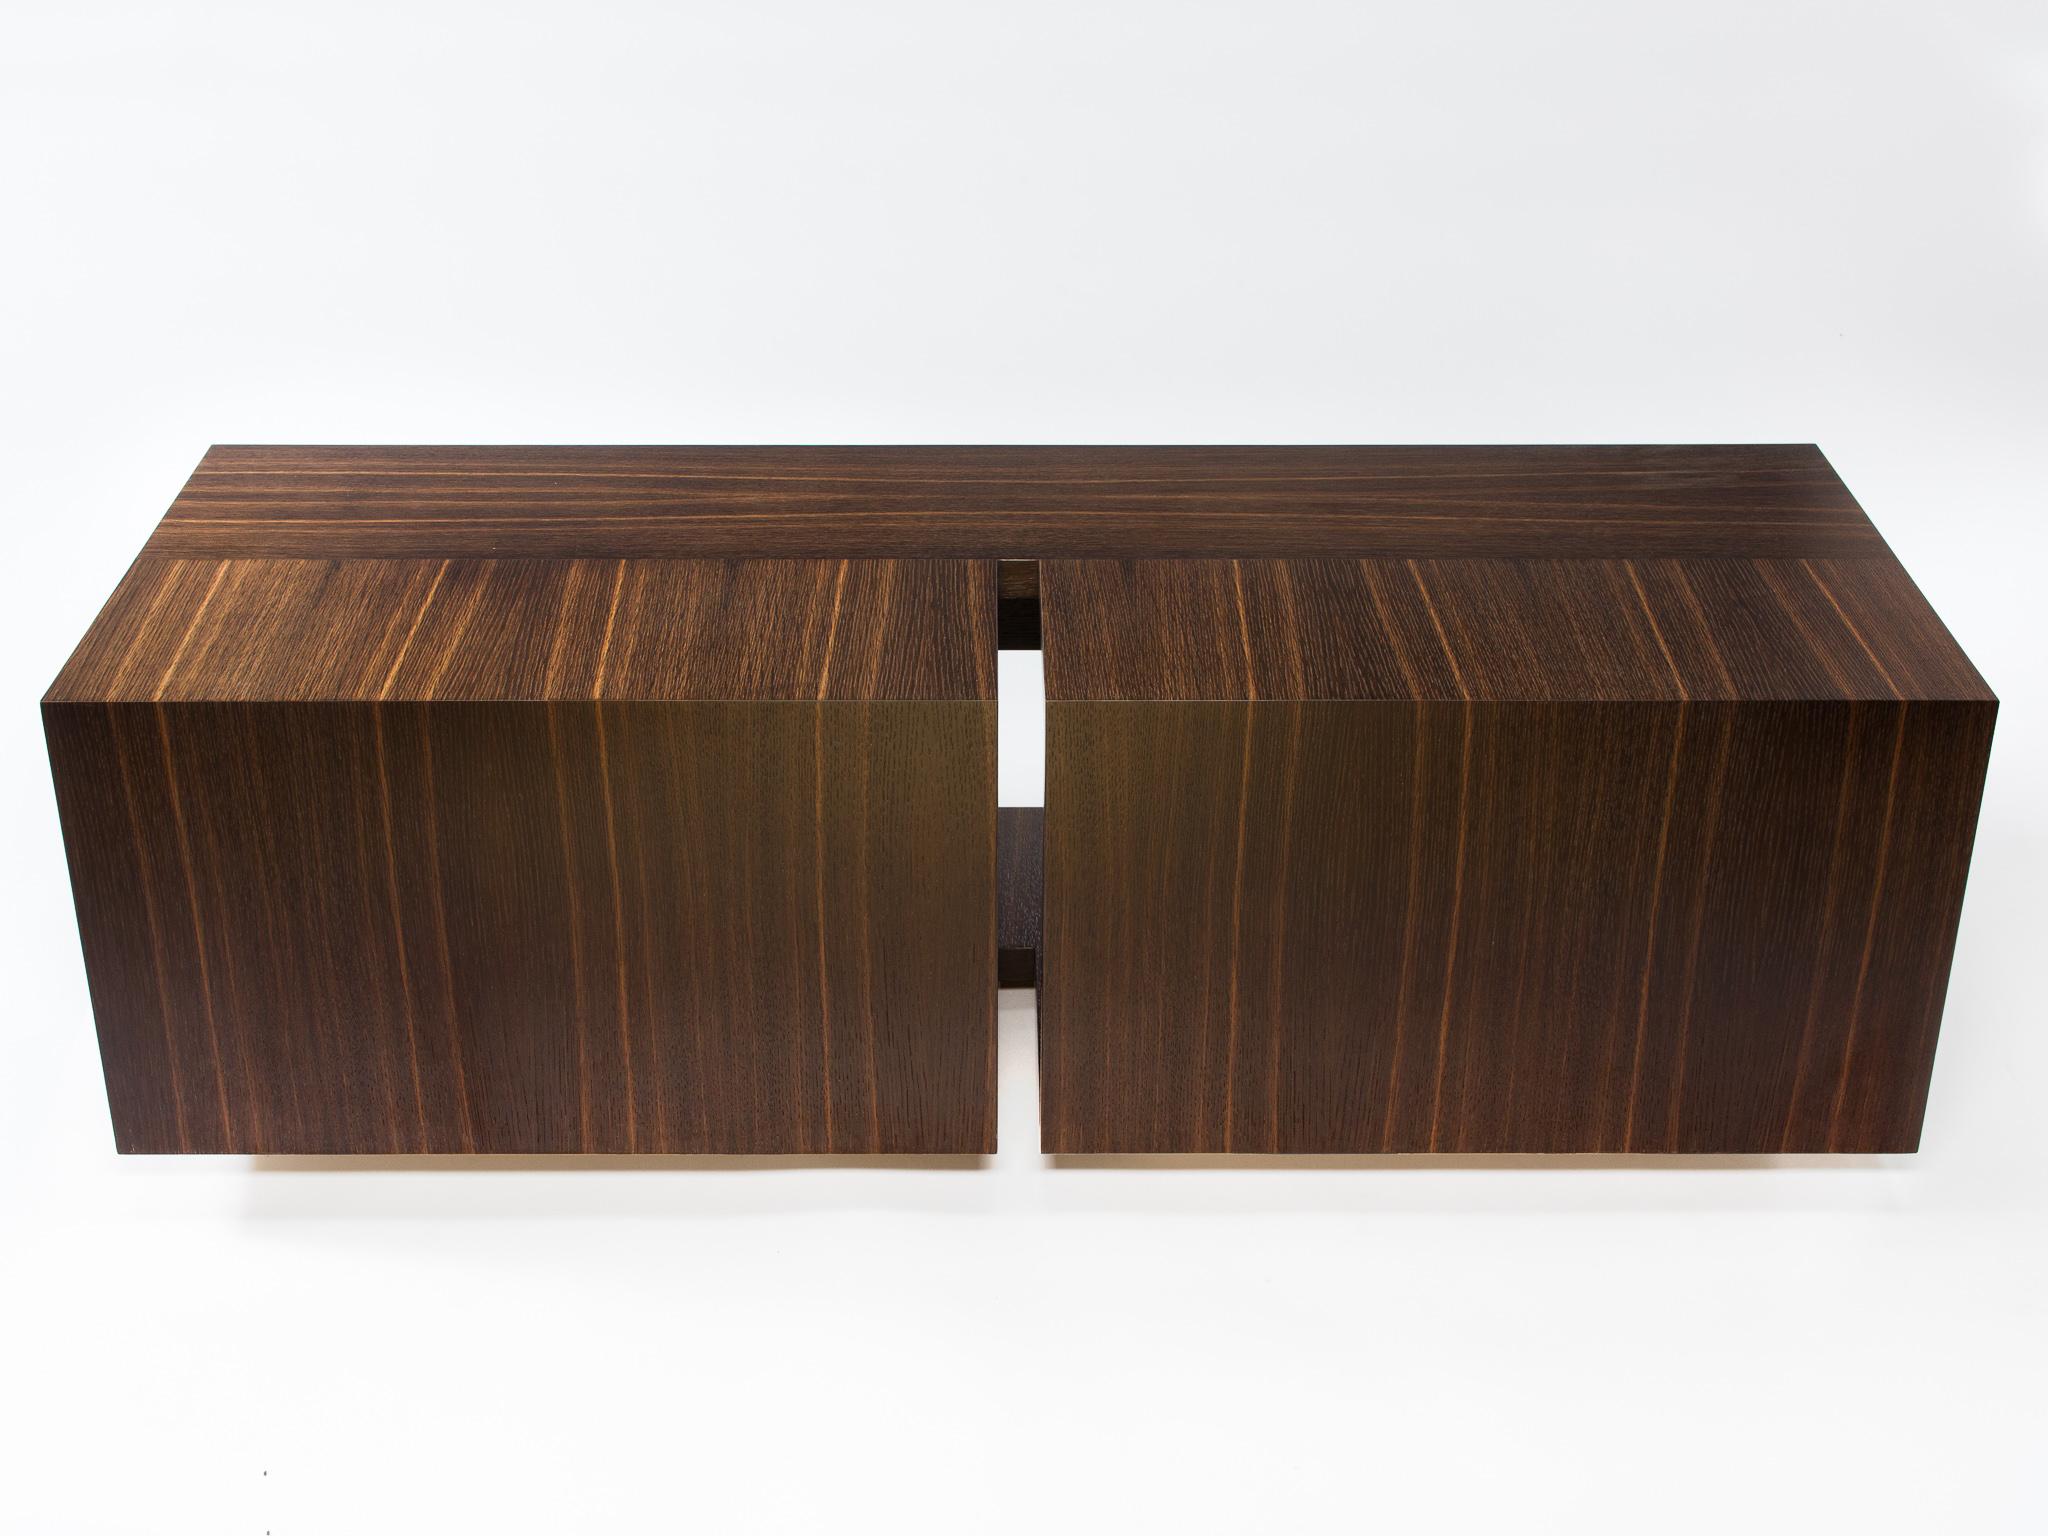 Hand-Crafted Modern Wood Coffee Table in Fumed Ebony Oak, by Studio DiPaolo For Sale